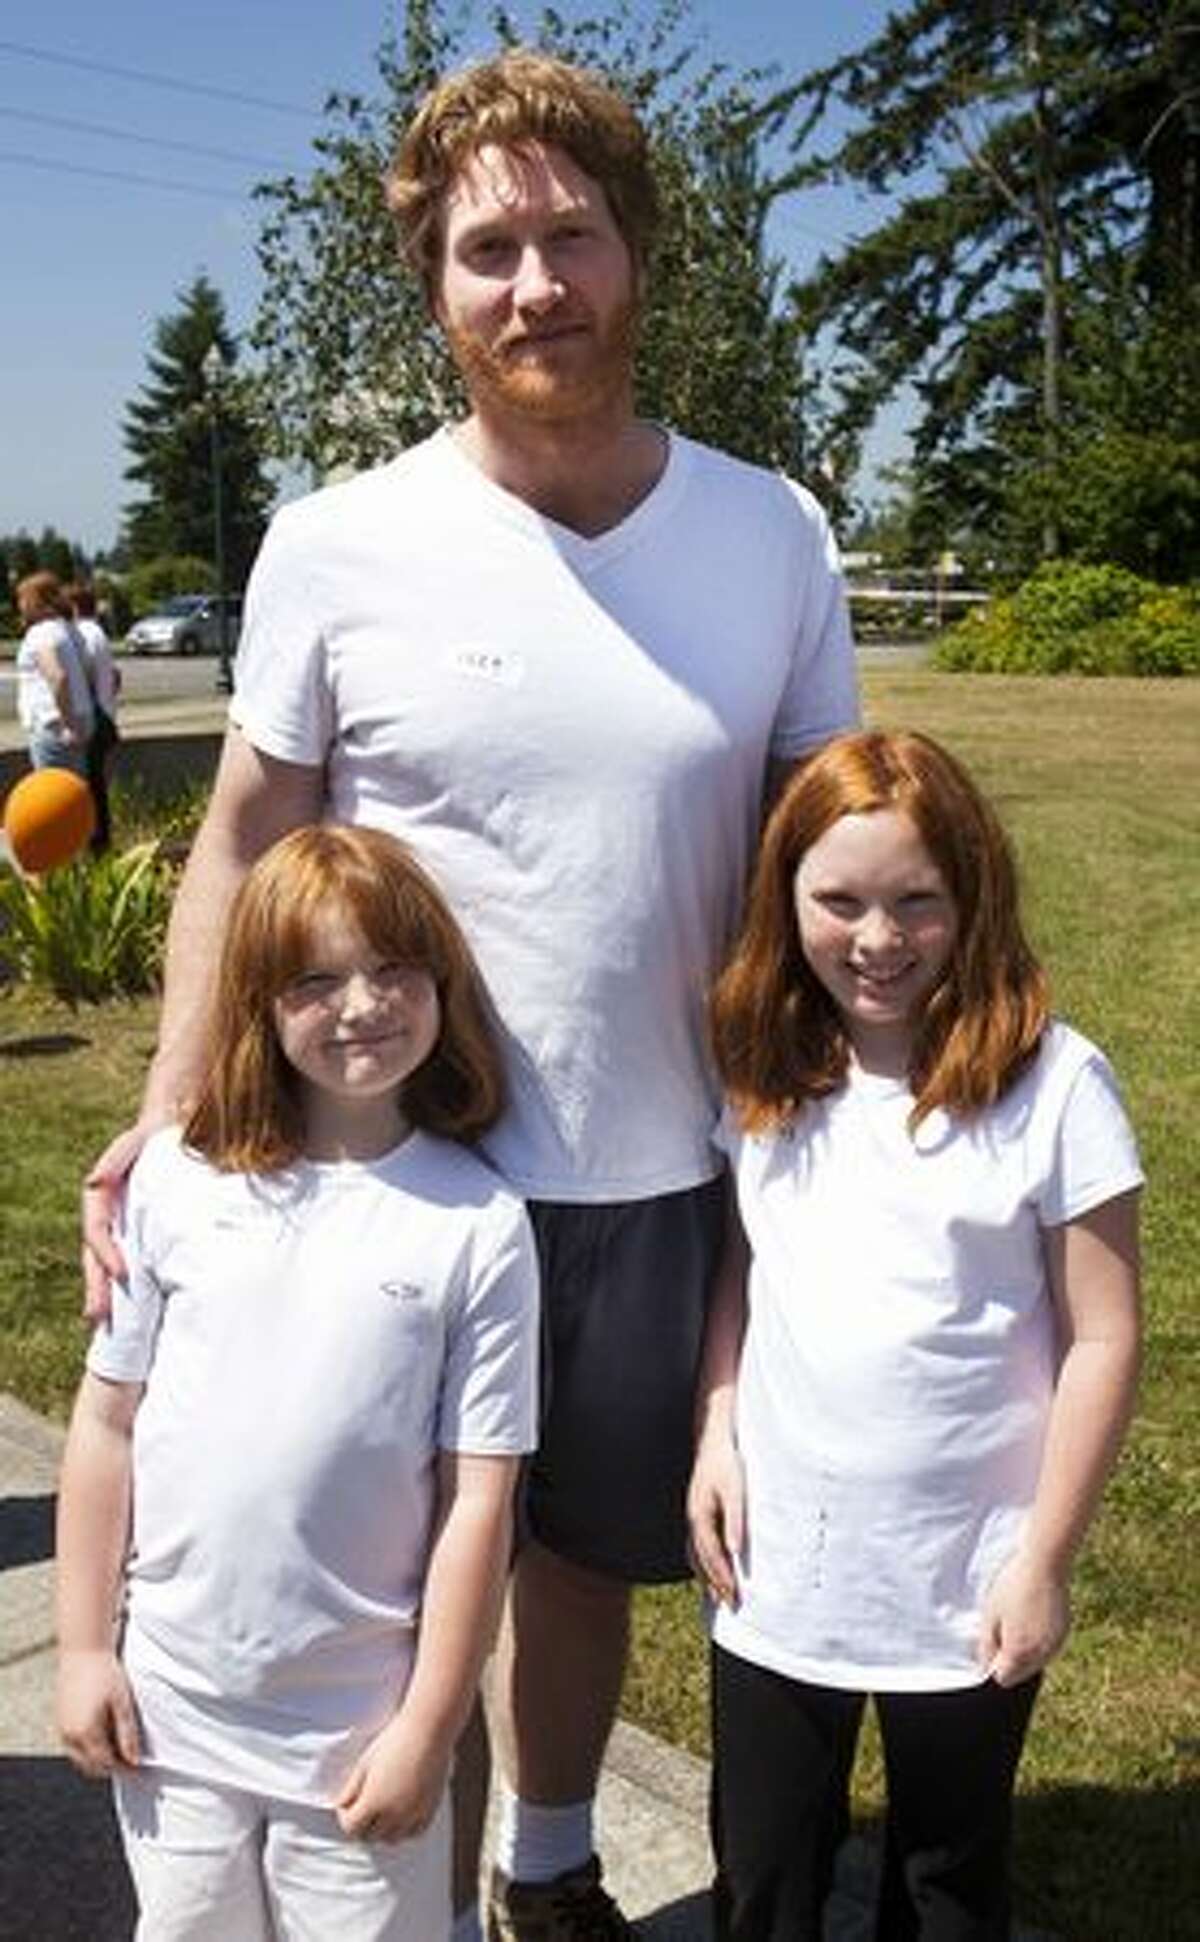 Molly, 7, Megan, 10, and Rob McAdams wait in line for Redheads and More Redheads Day.